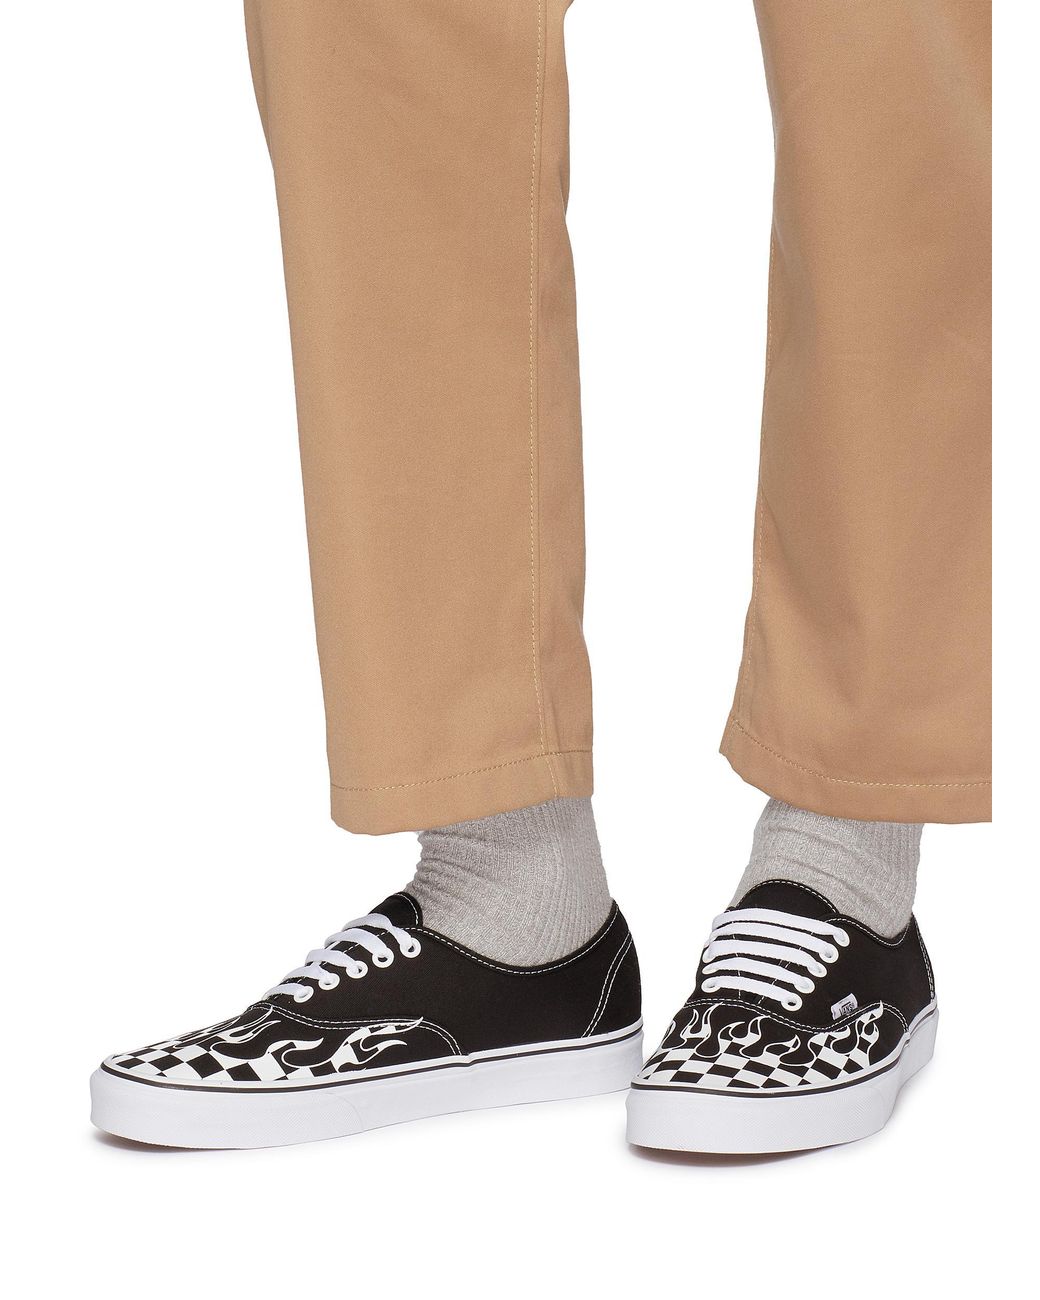 Vans 'authentic' Checkerboard Flame Canvas Sneakers in Black for Men | Lyst